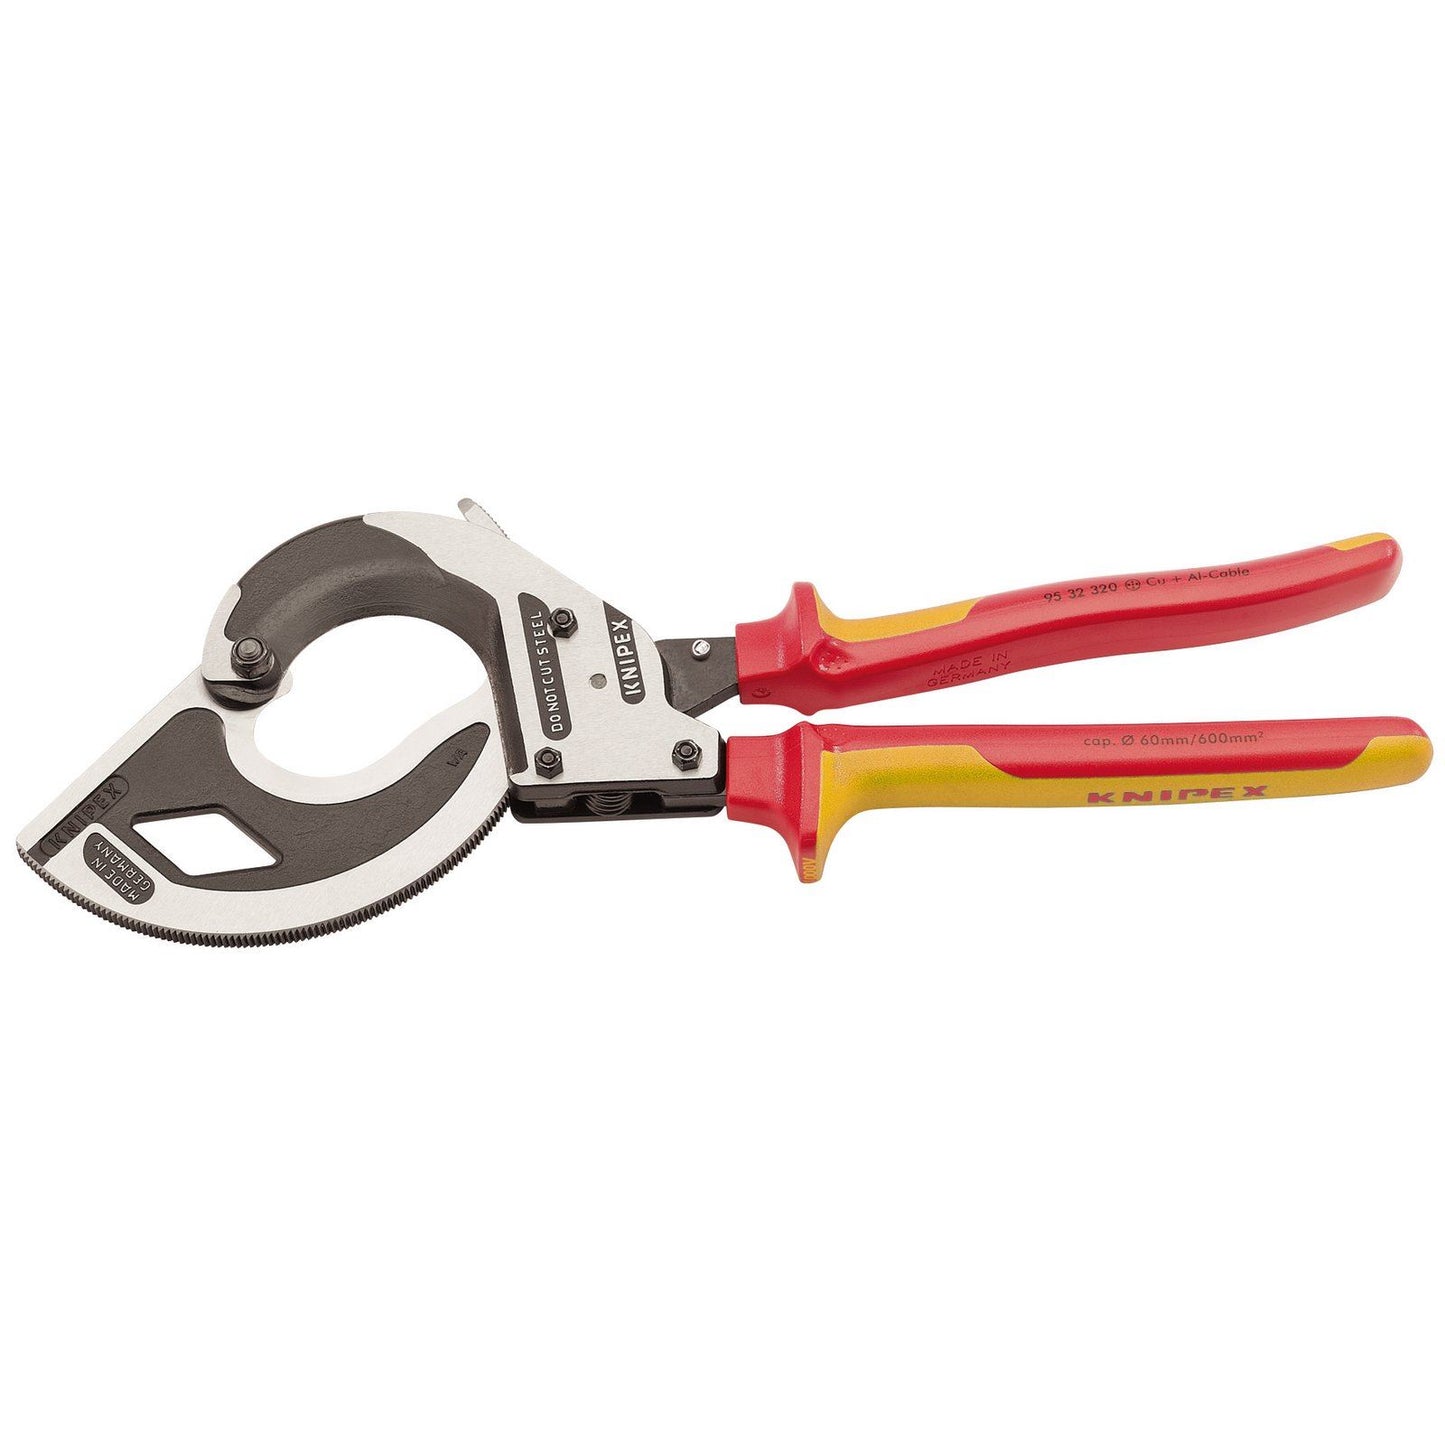 Knipex 95 36 320 - 350mm VDE Heavy Duty Cable Cutter Professional Tool - 25881